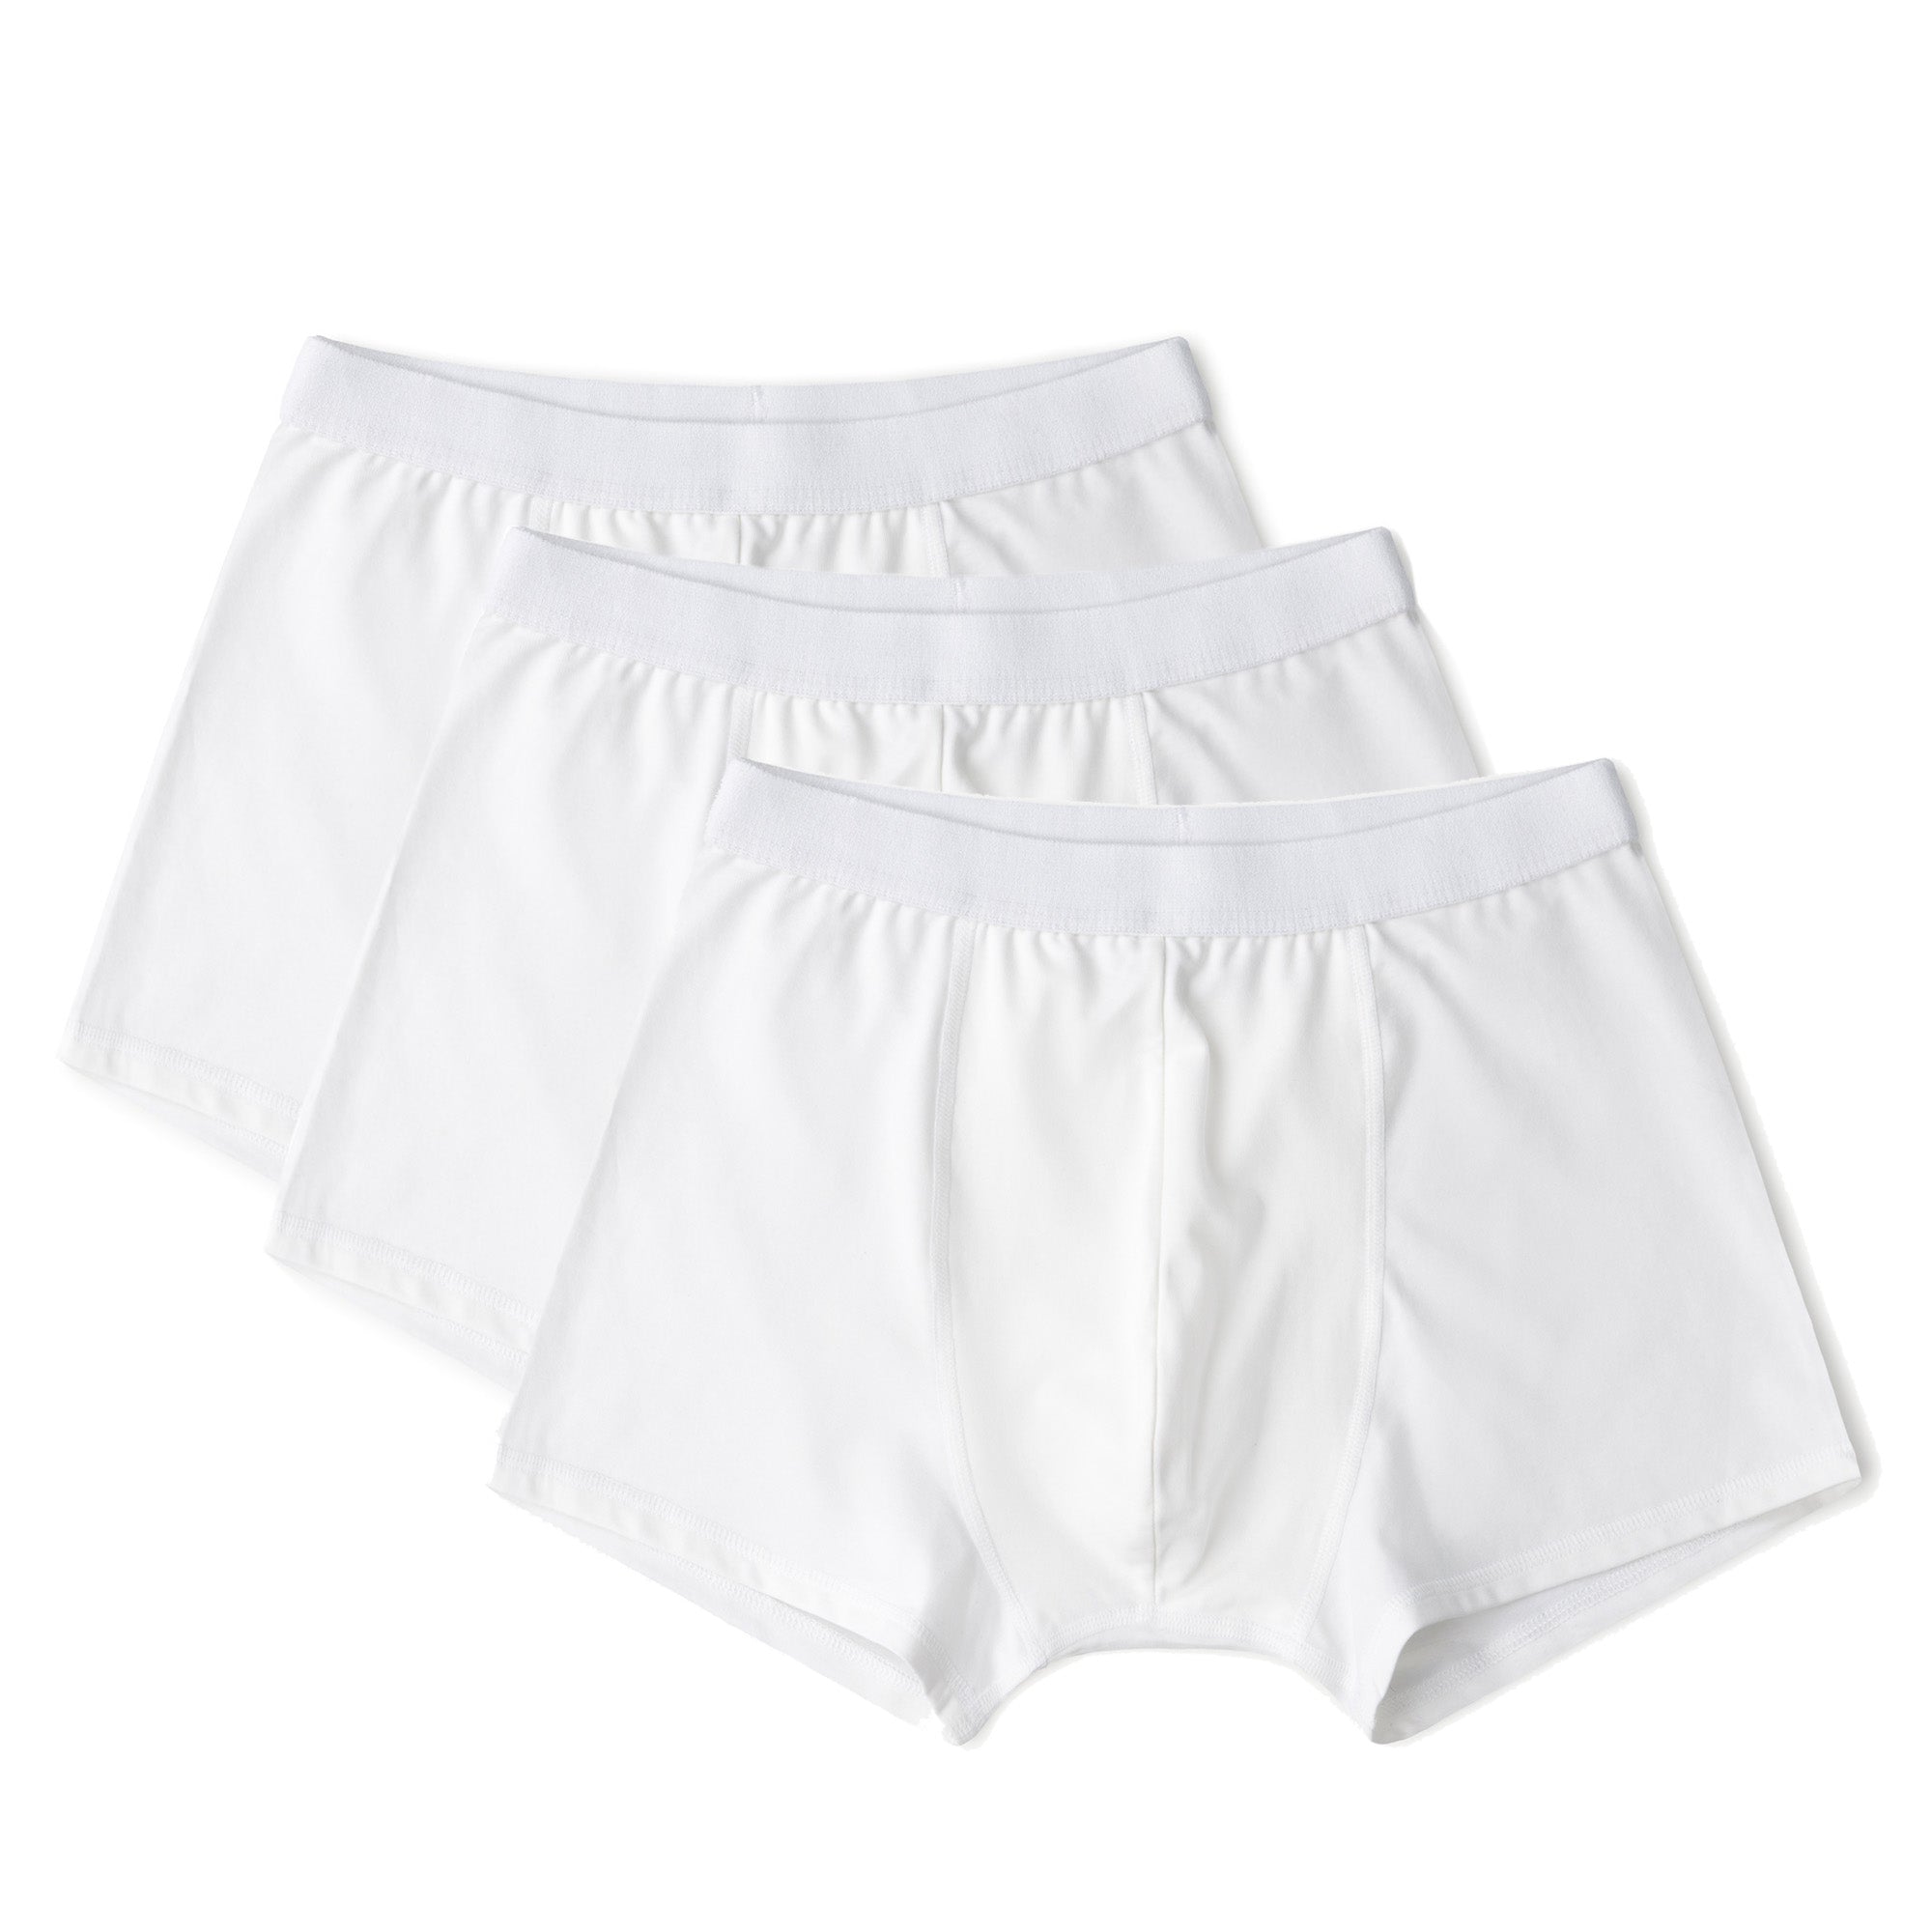 White Organic & Recycled cotton Boxer Briefs 3 pack